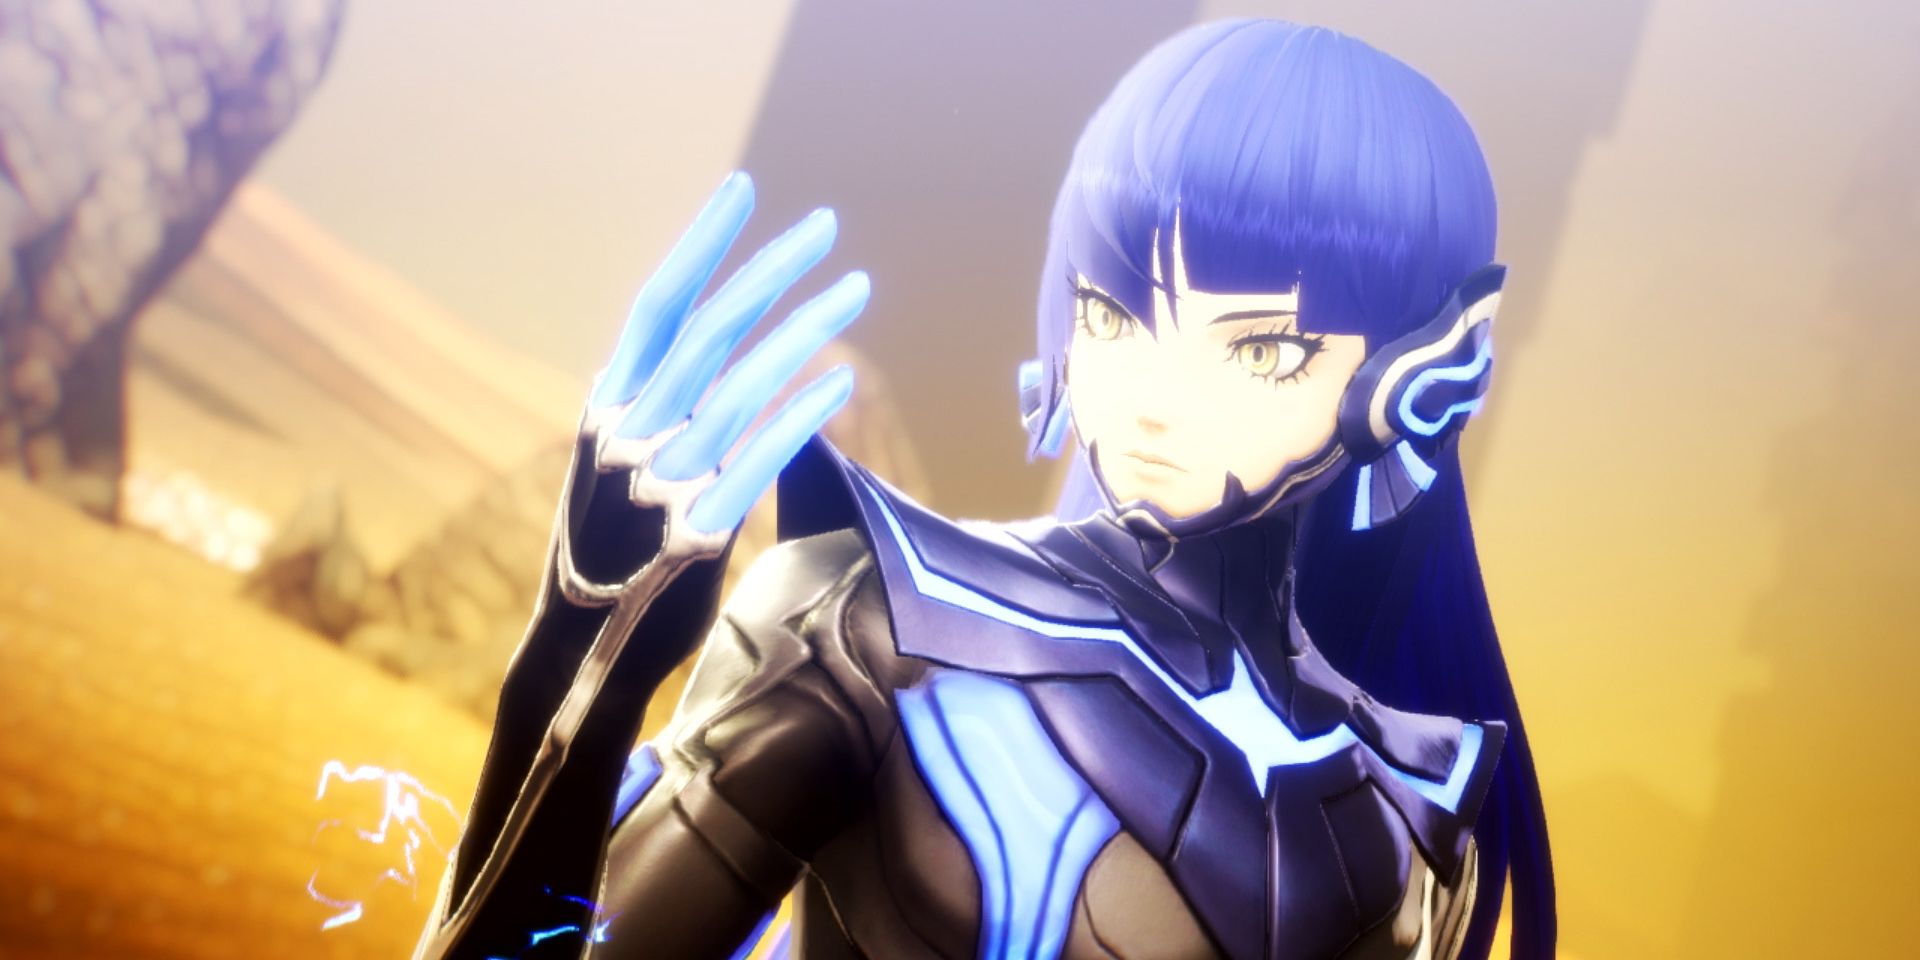 Demifiend looks at her hand in a screenshot from Shin Megami Tensei V